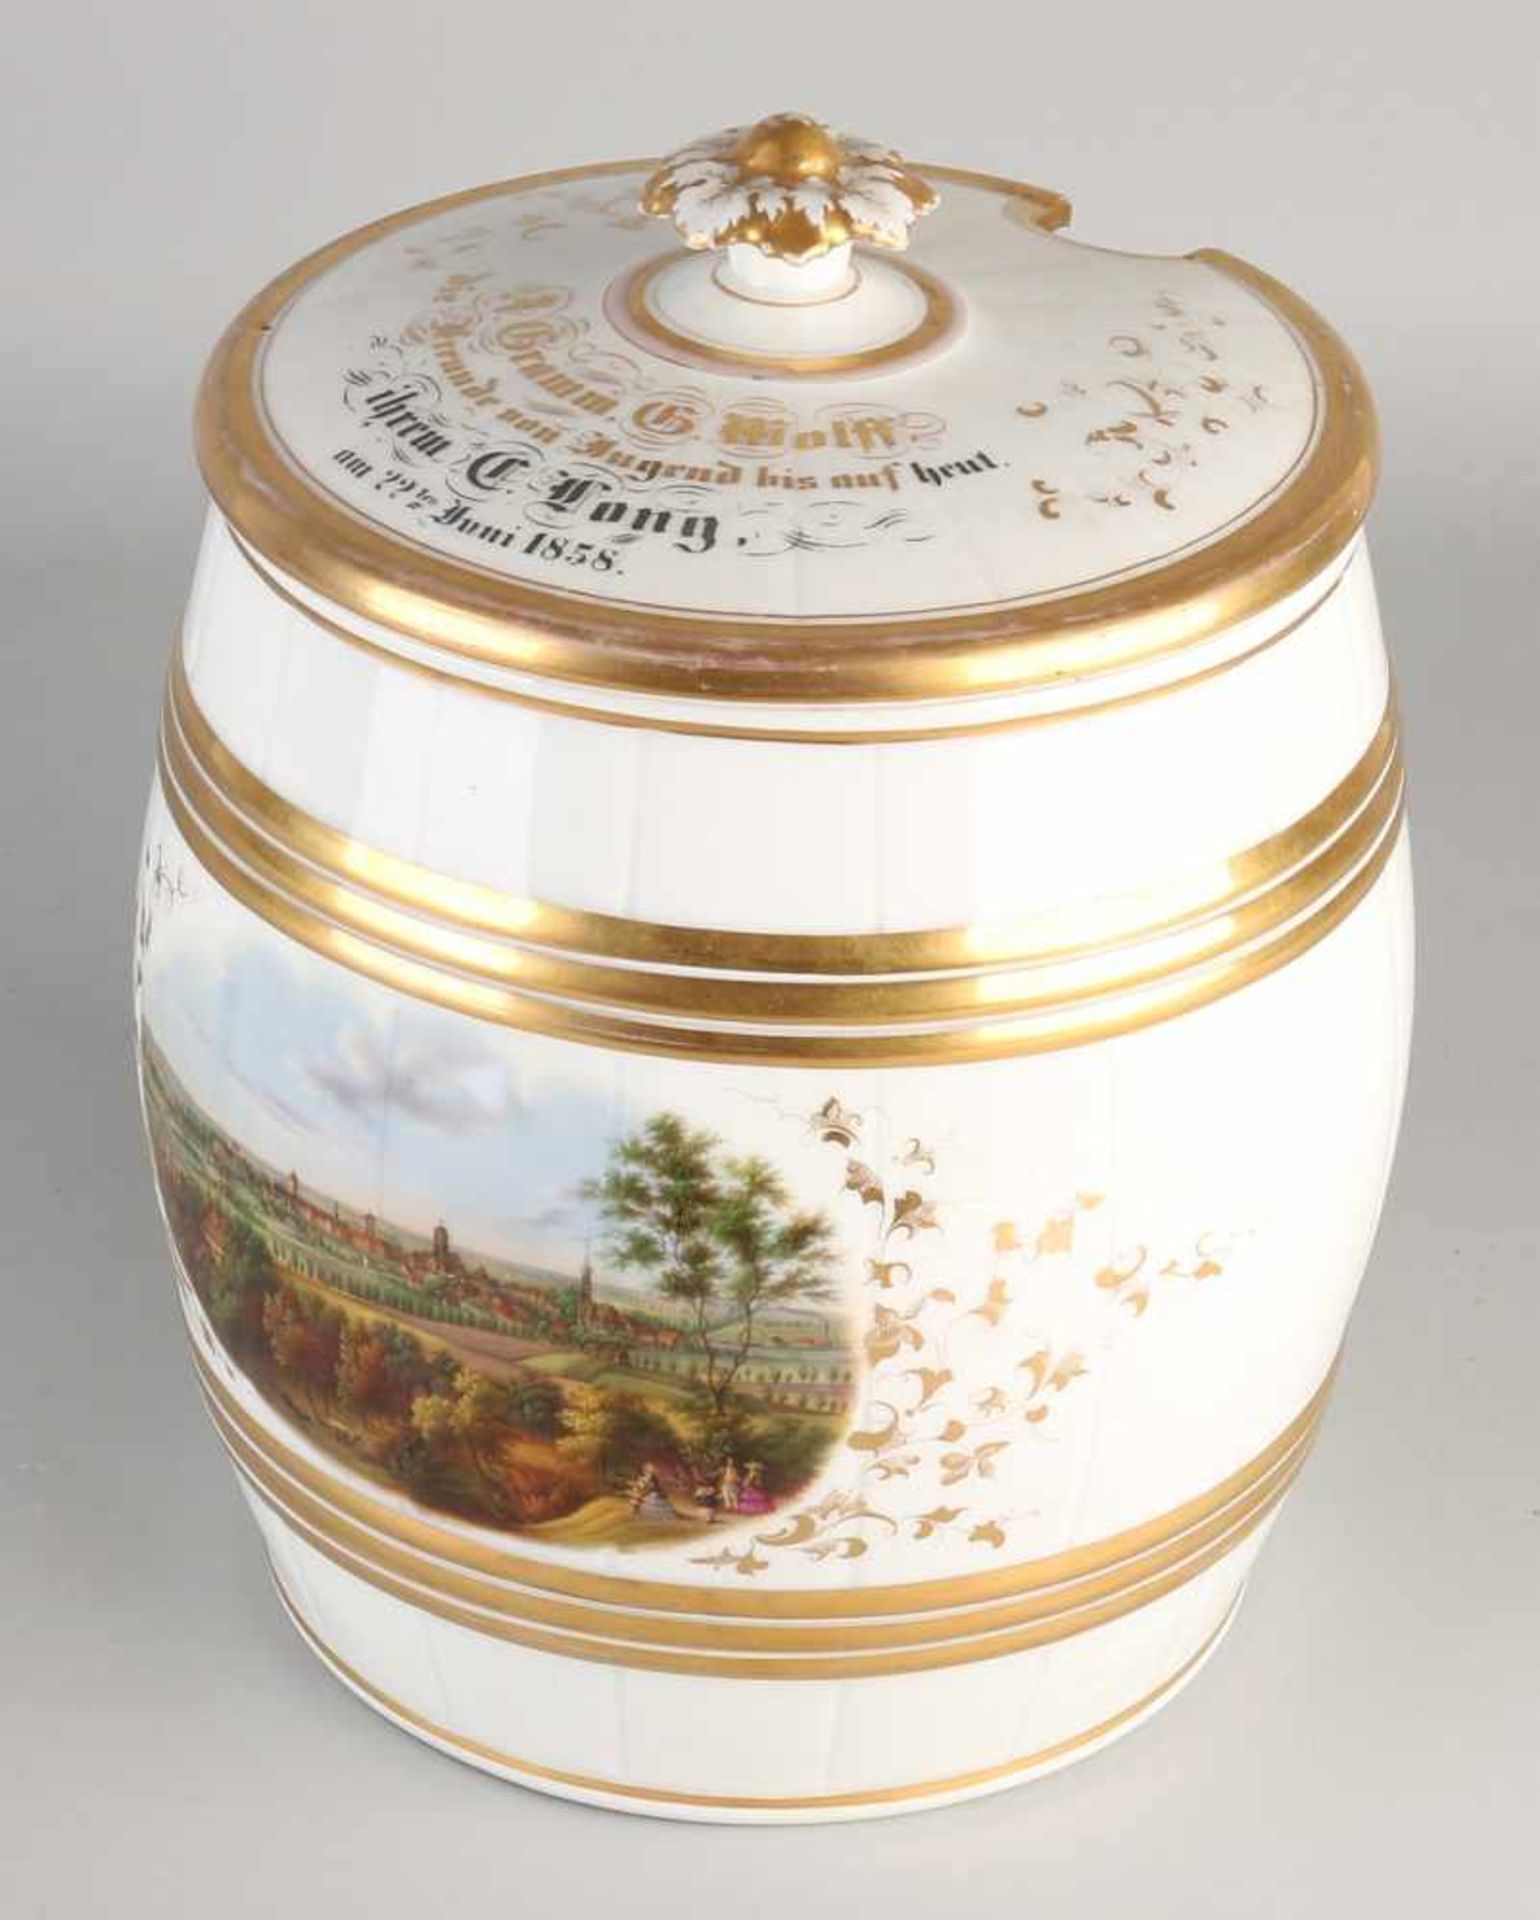 Large 19th century German KPM porcelain lidded with hand-painted landscape and gold decor.